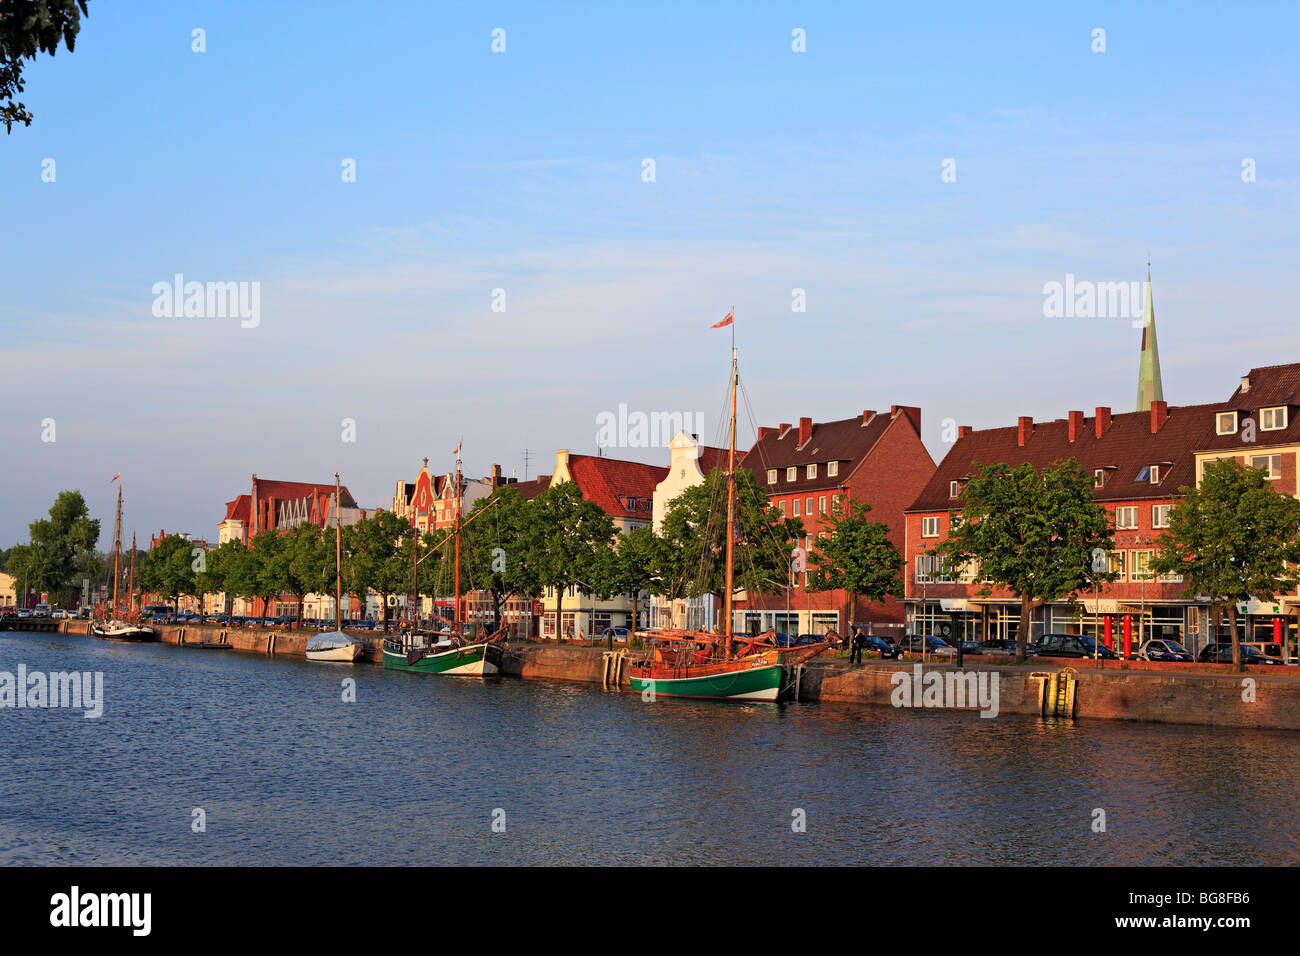 Lubeck, Trave river, Schleswig-Holstein, Germany Stock Photo